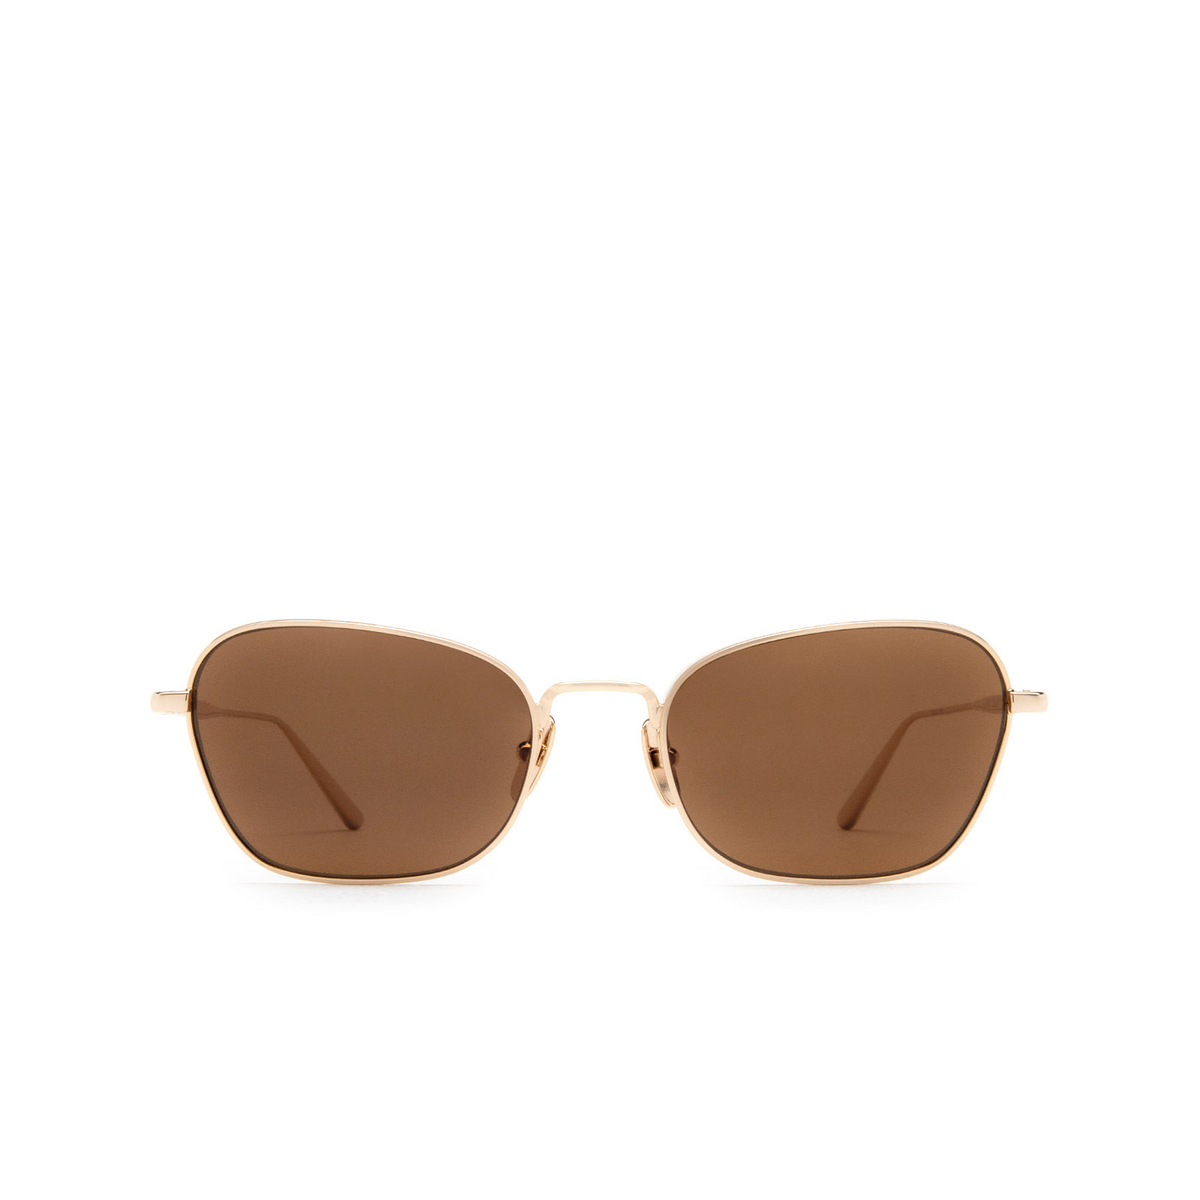 Chimi LYNX Sunglasses BROWN - front view